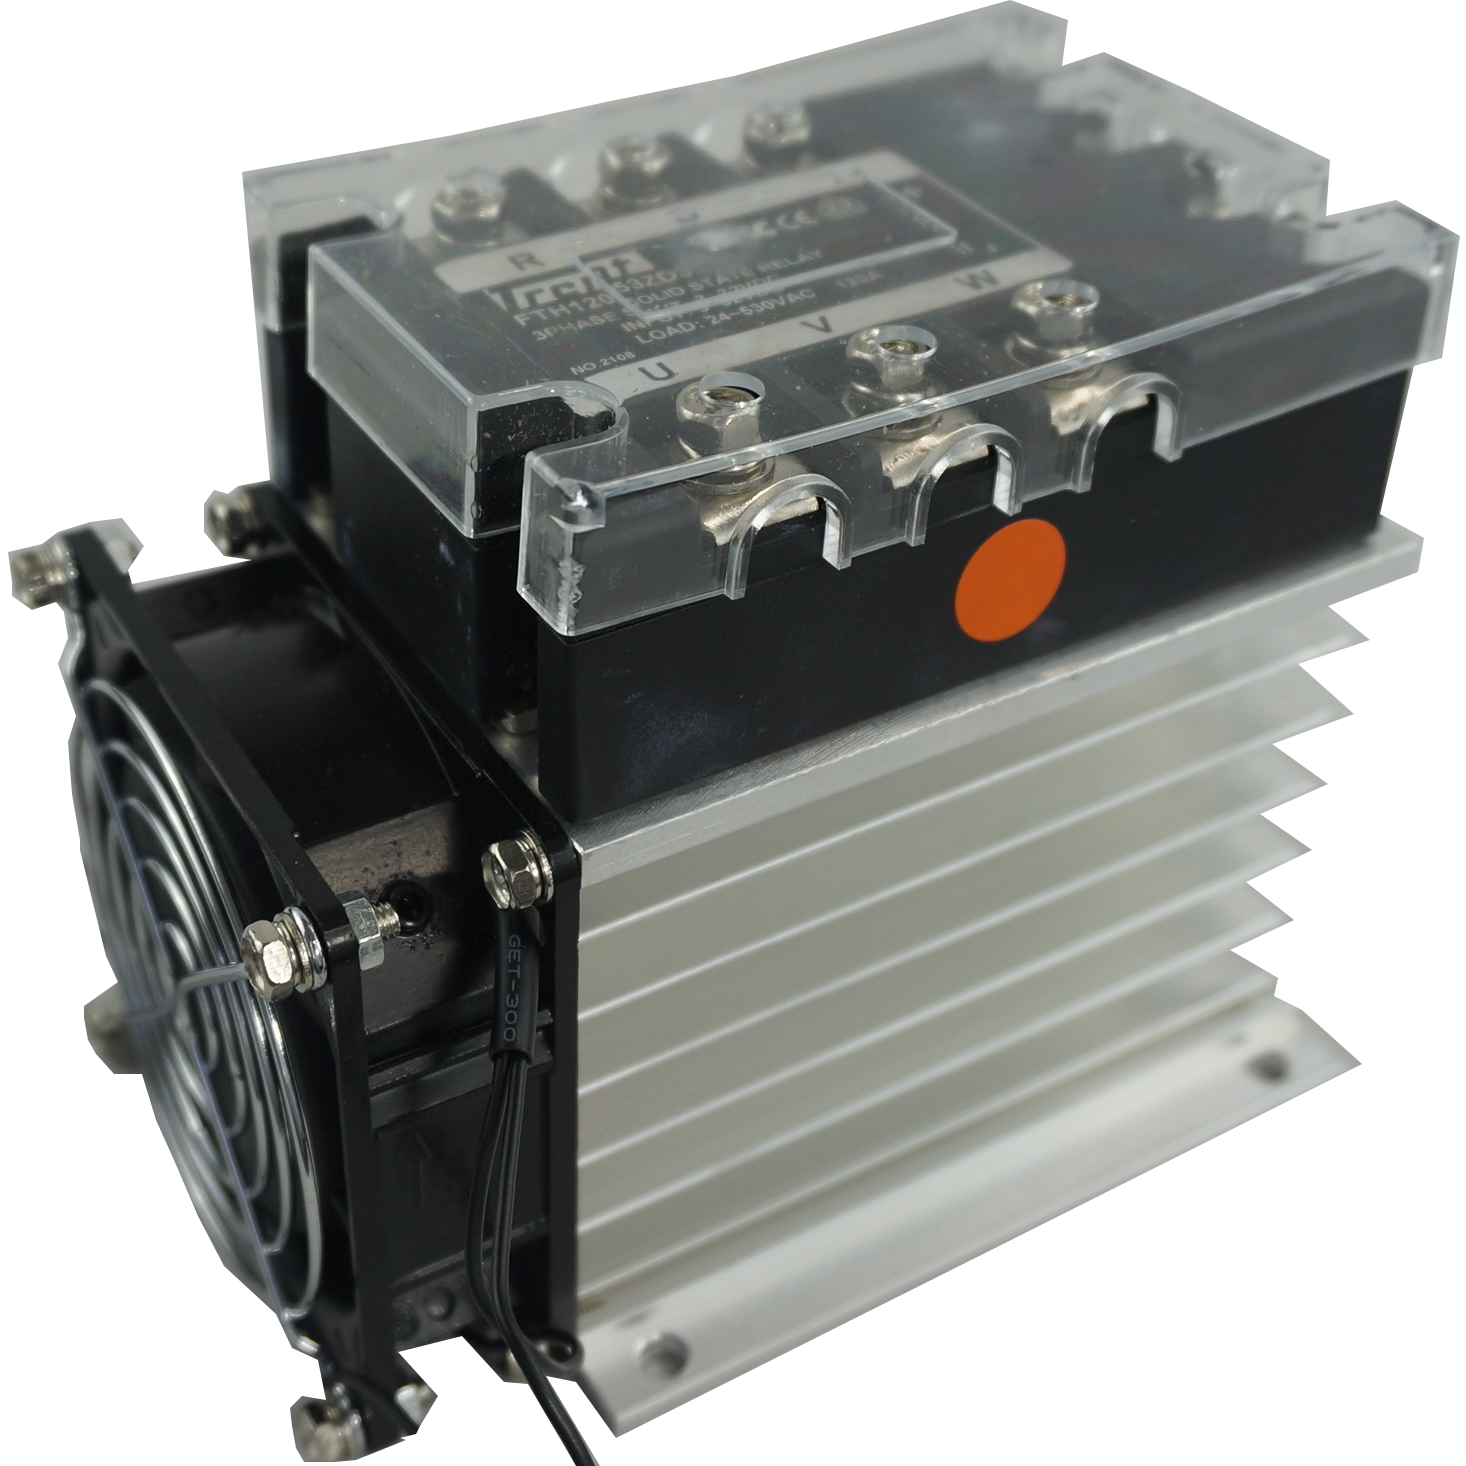 FTH6053ZD3 + HS212DR-F, Solid State Relay, and Heatsink Assembly, 3 Phase 4-32VDC Control, 36 Amp per phase @ 40 Deg C, 48-530VAC Load, LED Status Indicator, with IP20 Cover